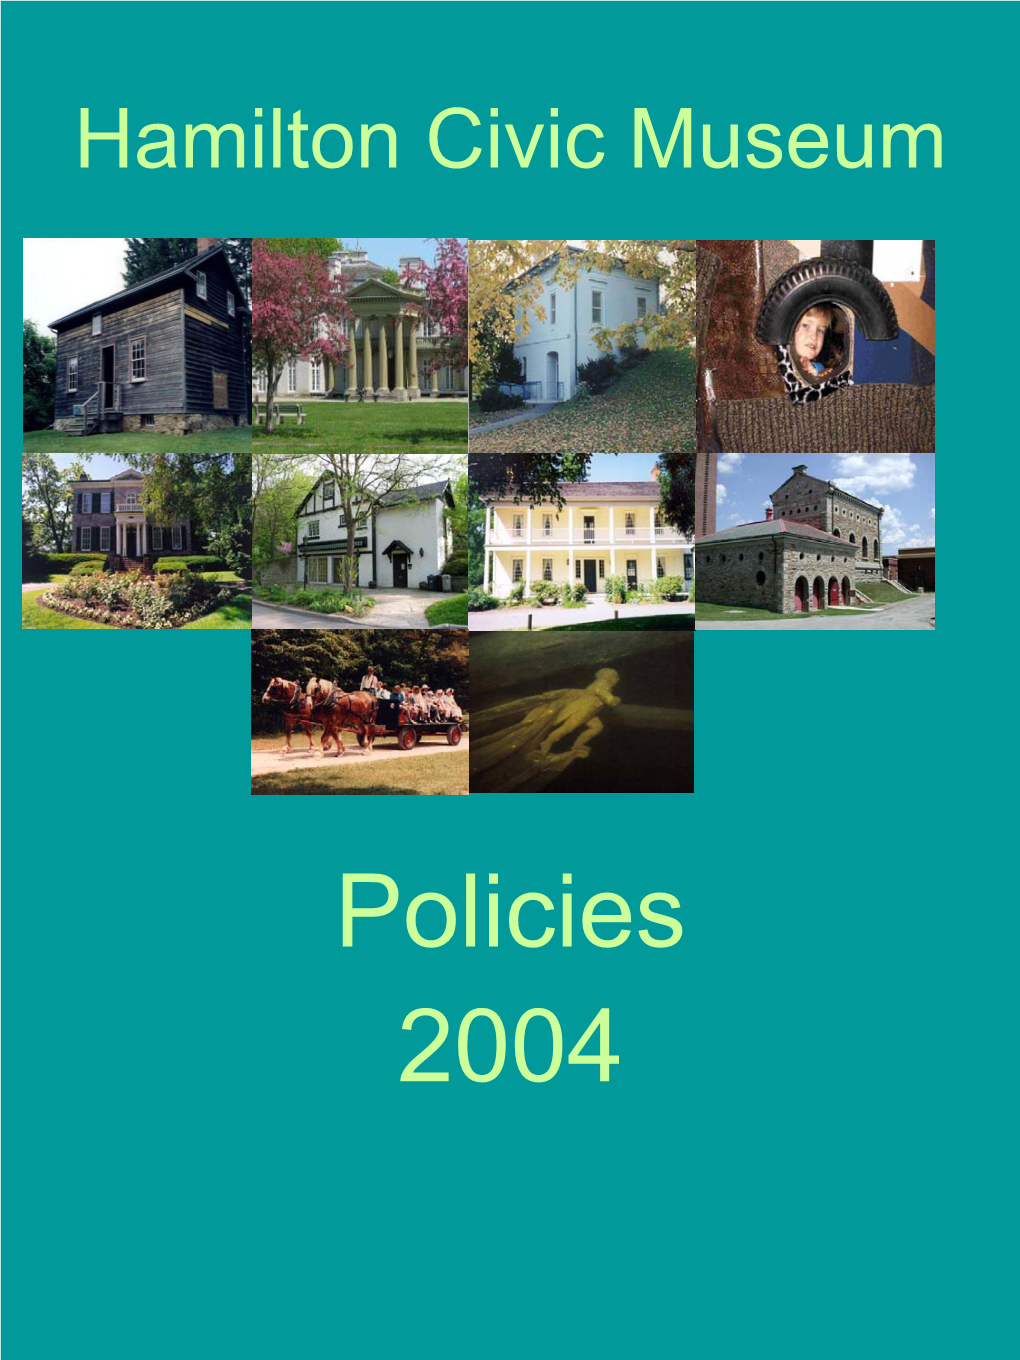 Policies 2004 Subject: Hamilton Civic Museums Policy Page 1 of 9